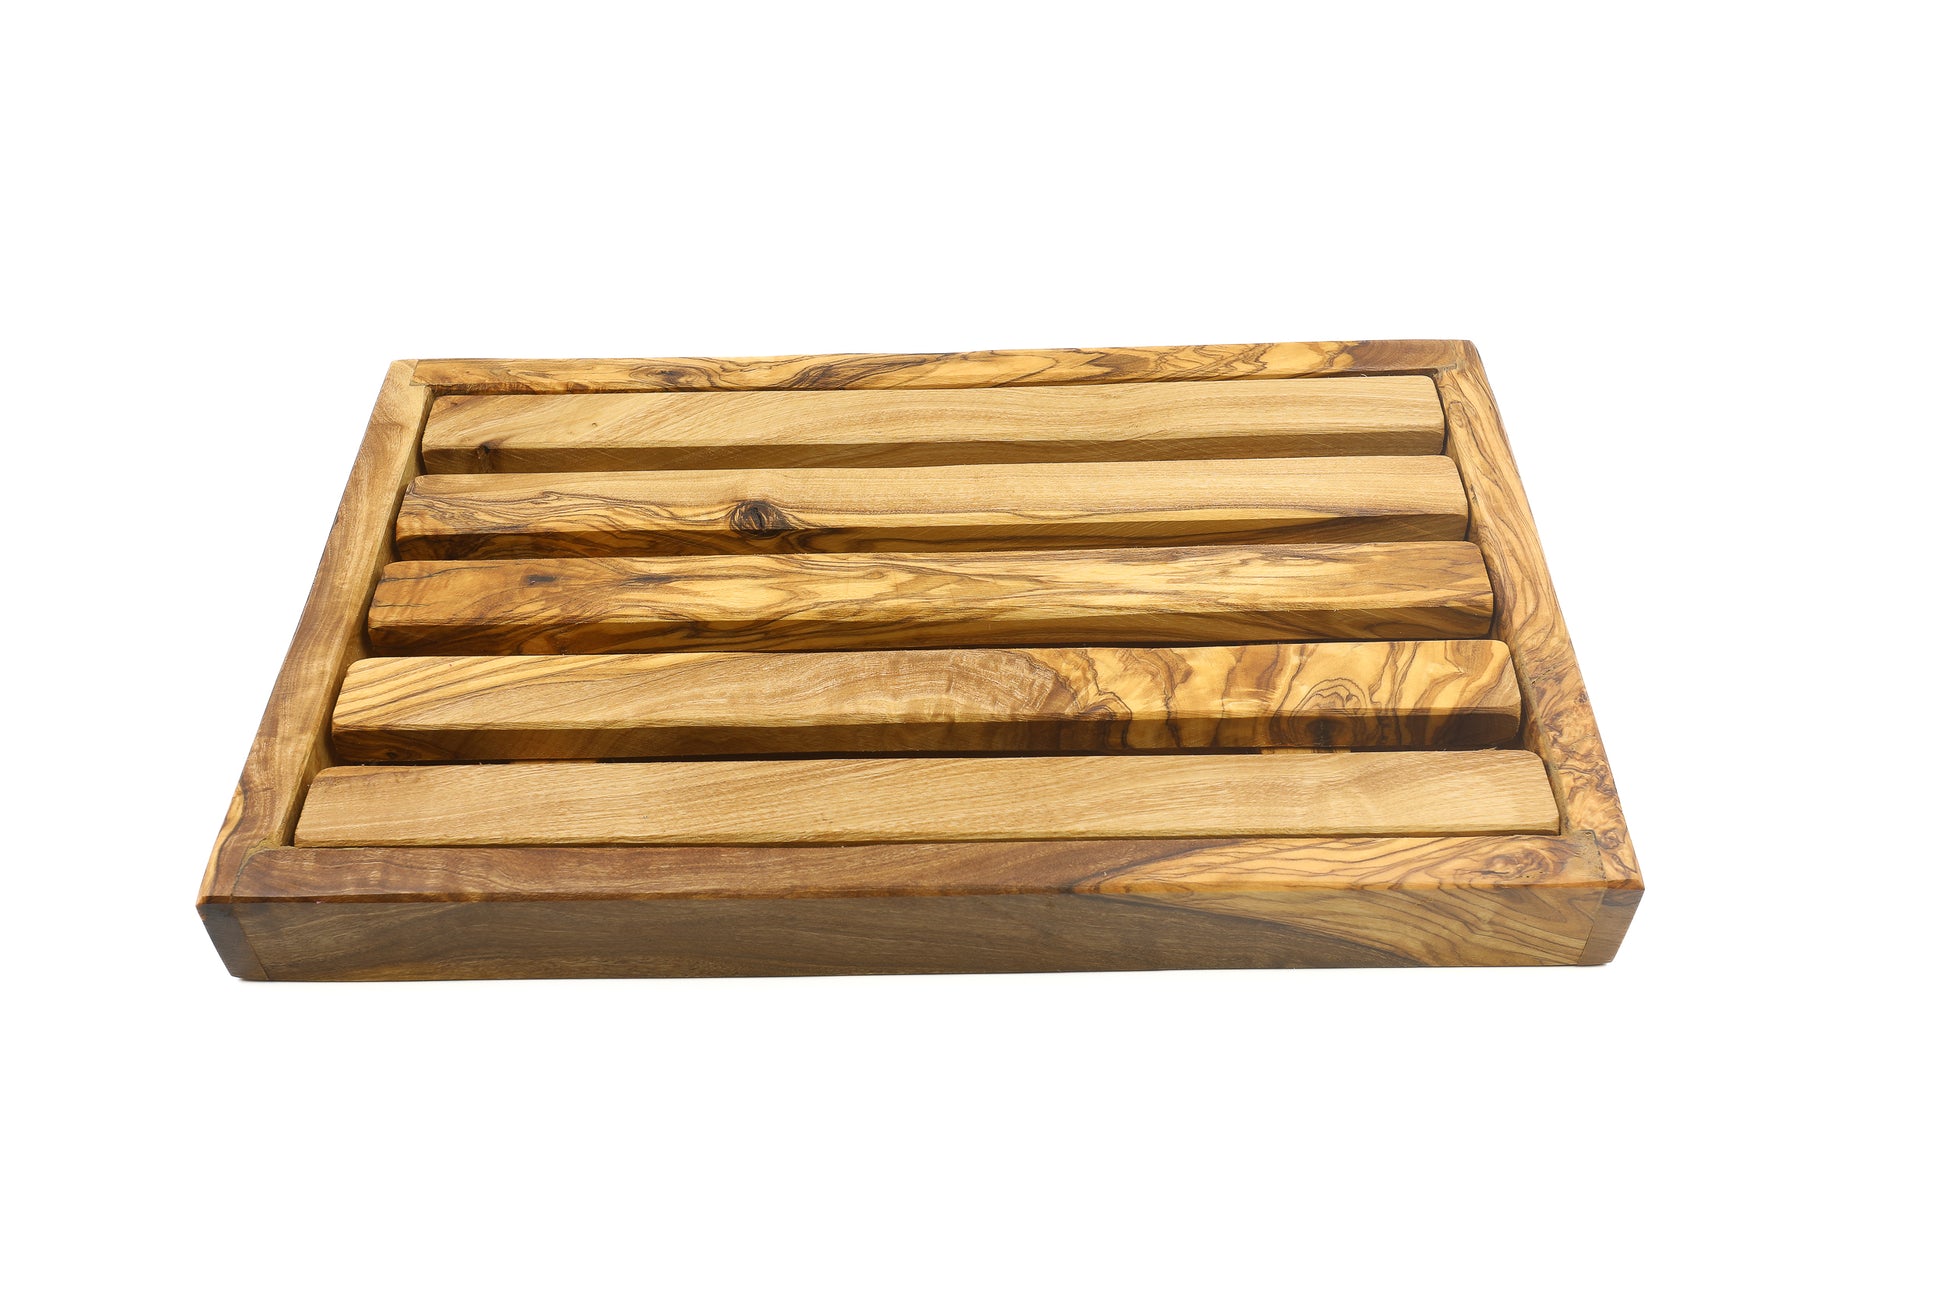 Olive wood rectangular bread cutting board designed to keep crumbs at bay